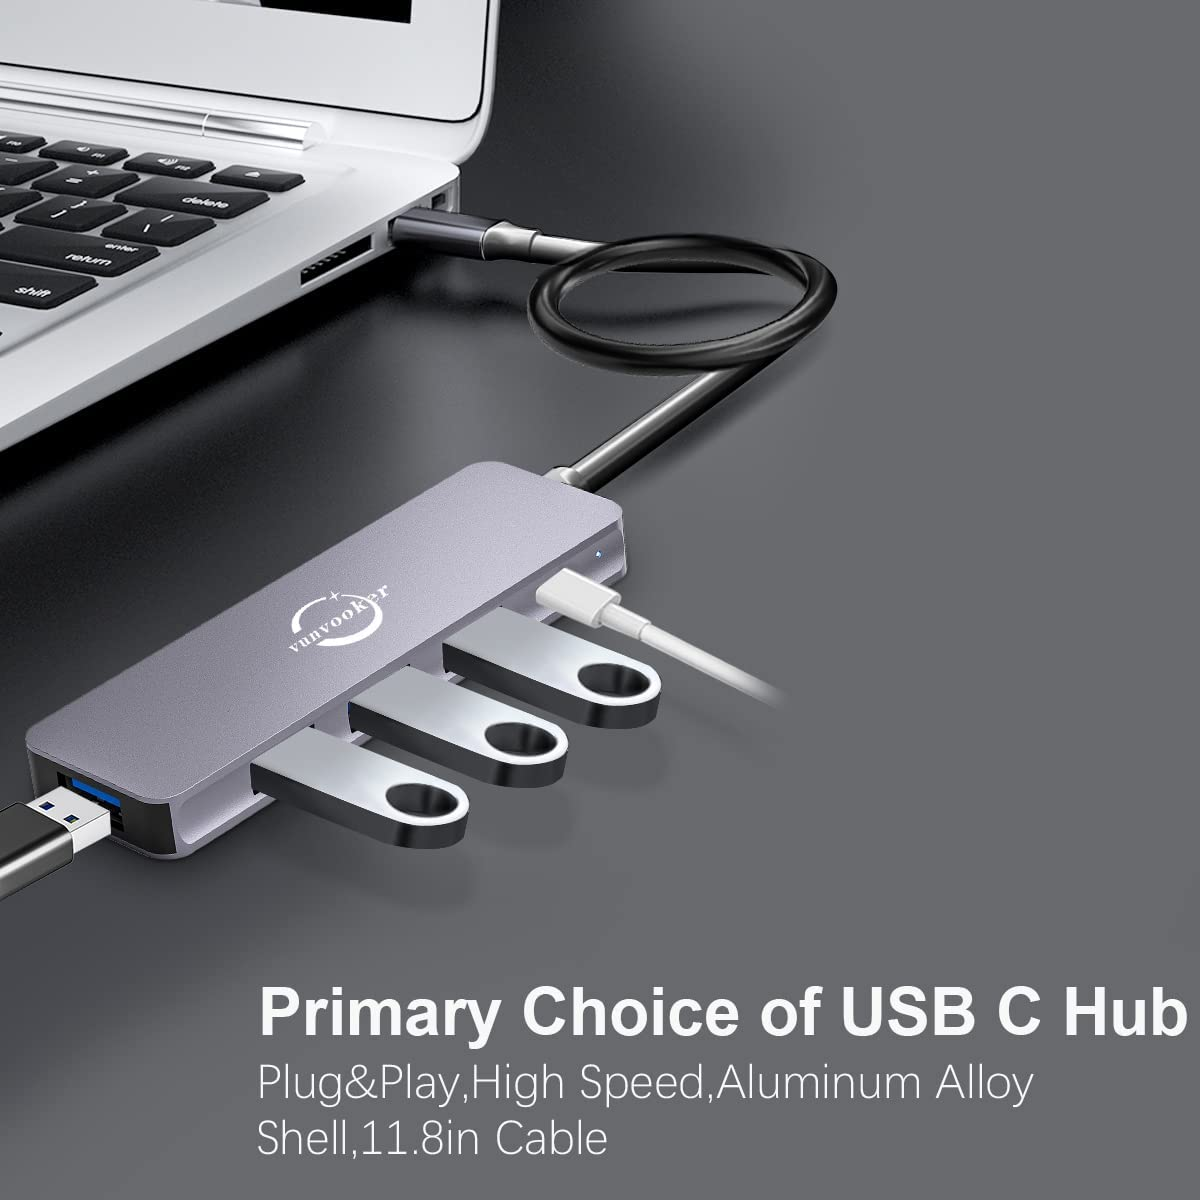 USB C to USB Hub , 5 In1 Mini Multiport Adapter with Long Cable,Usb-C Expander for Laptop(100W PD,3 USB2.0,1 Usb3.0),Slim Dongle Data Hub for Macbook Pro/Air,Imac,Surface,Xps,Pc,Type C Device